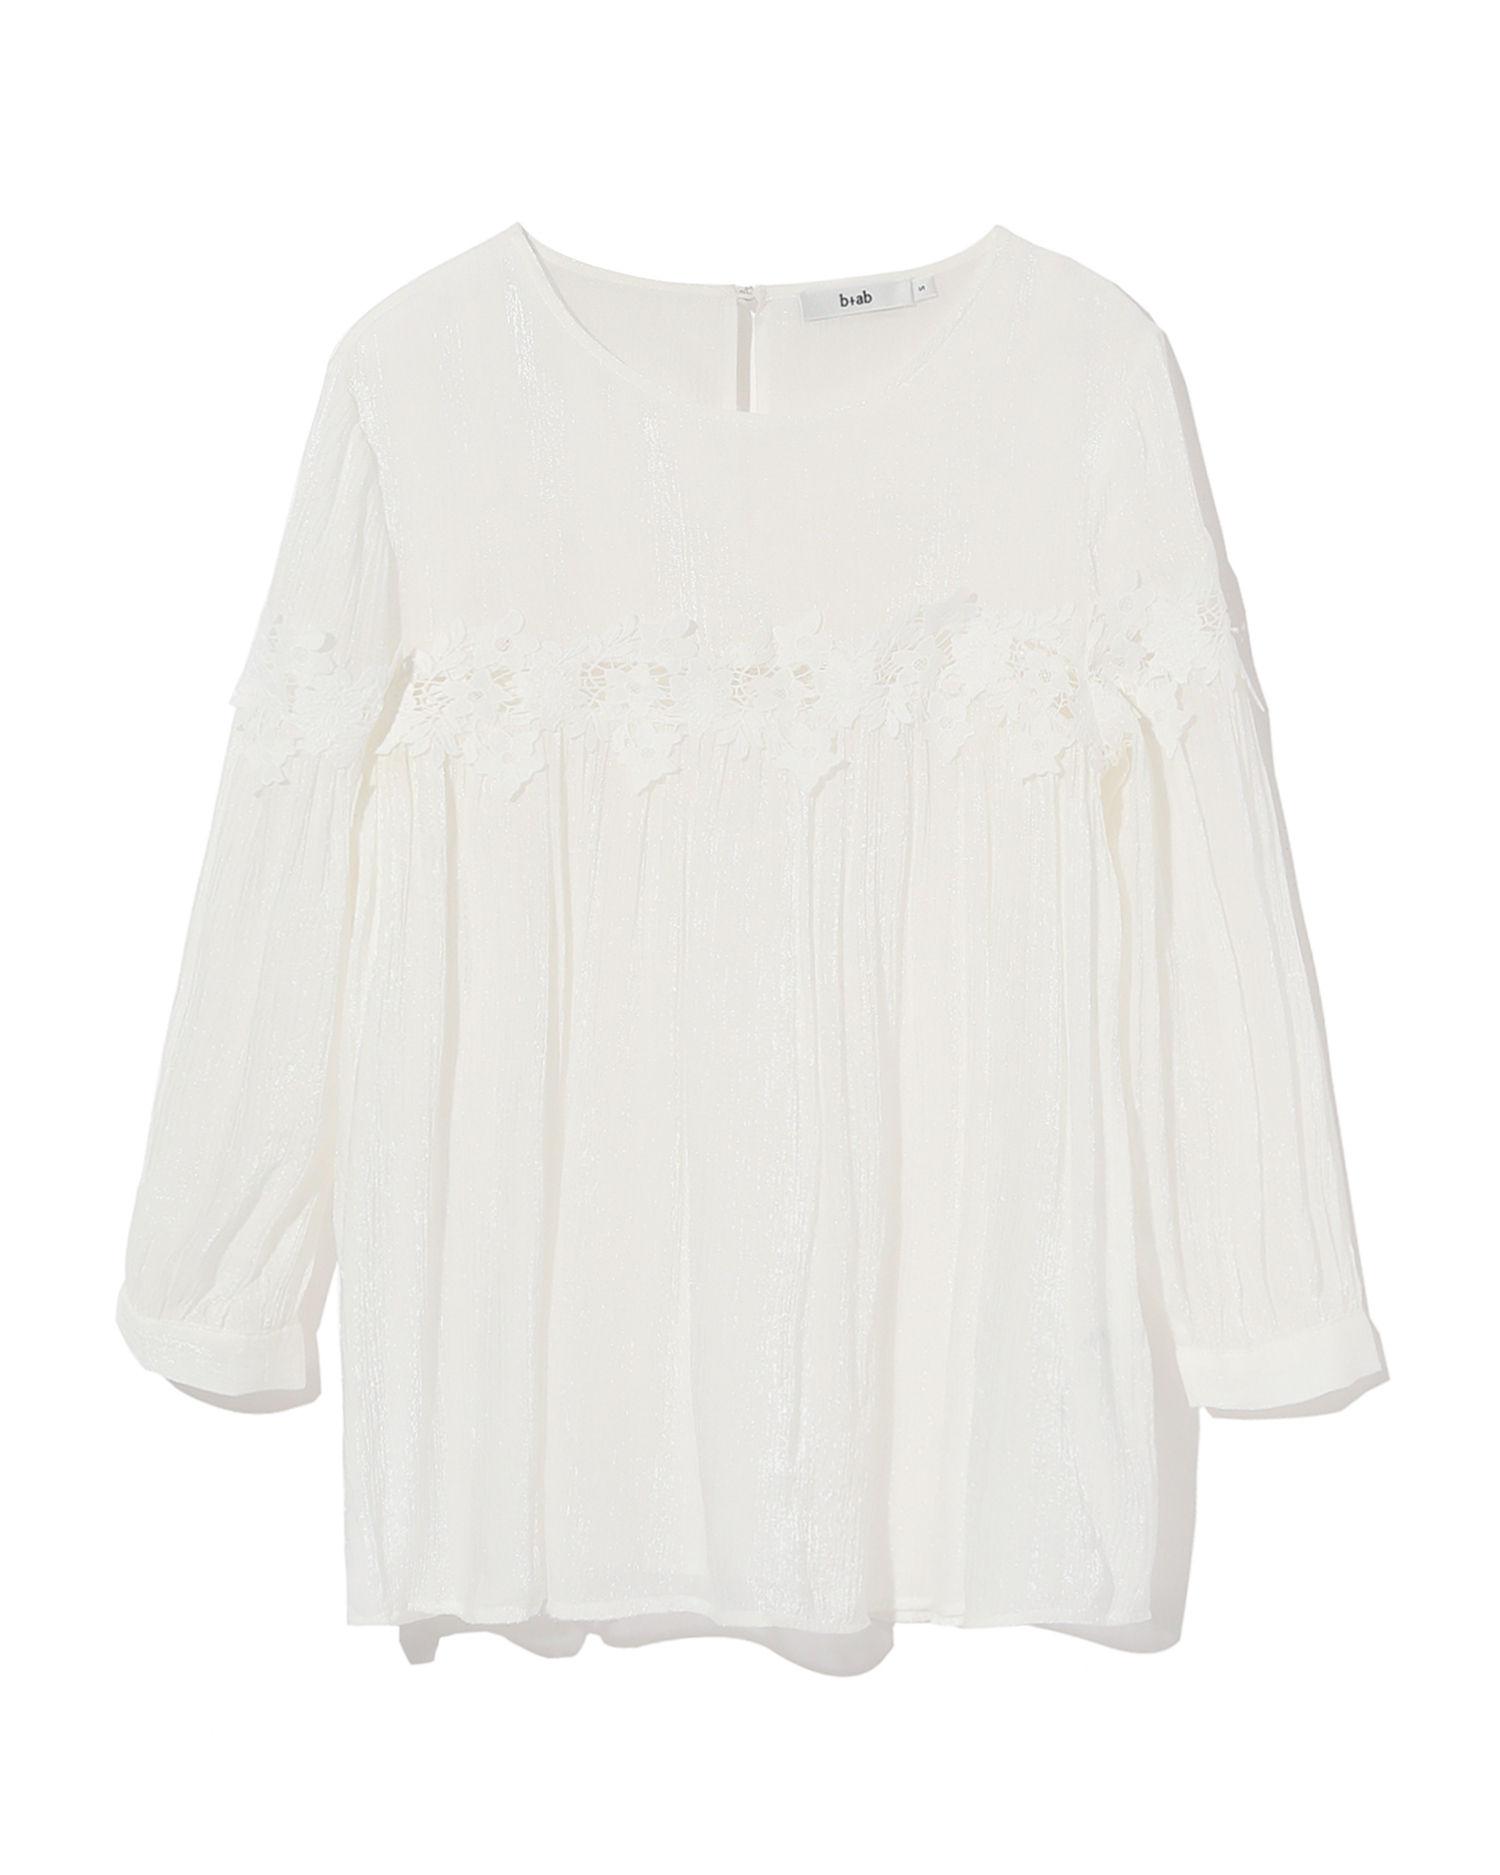 Lace panelled top by B+AB